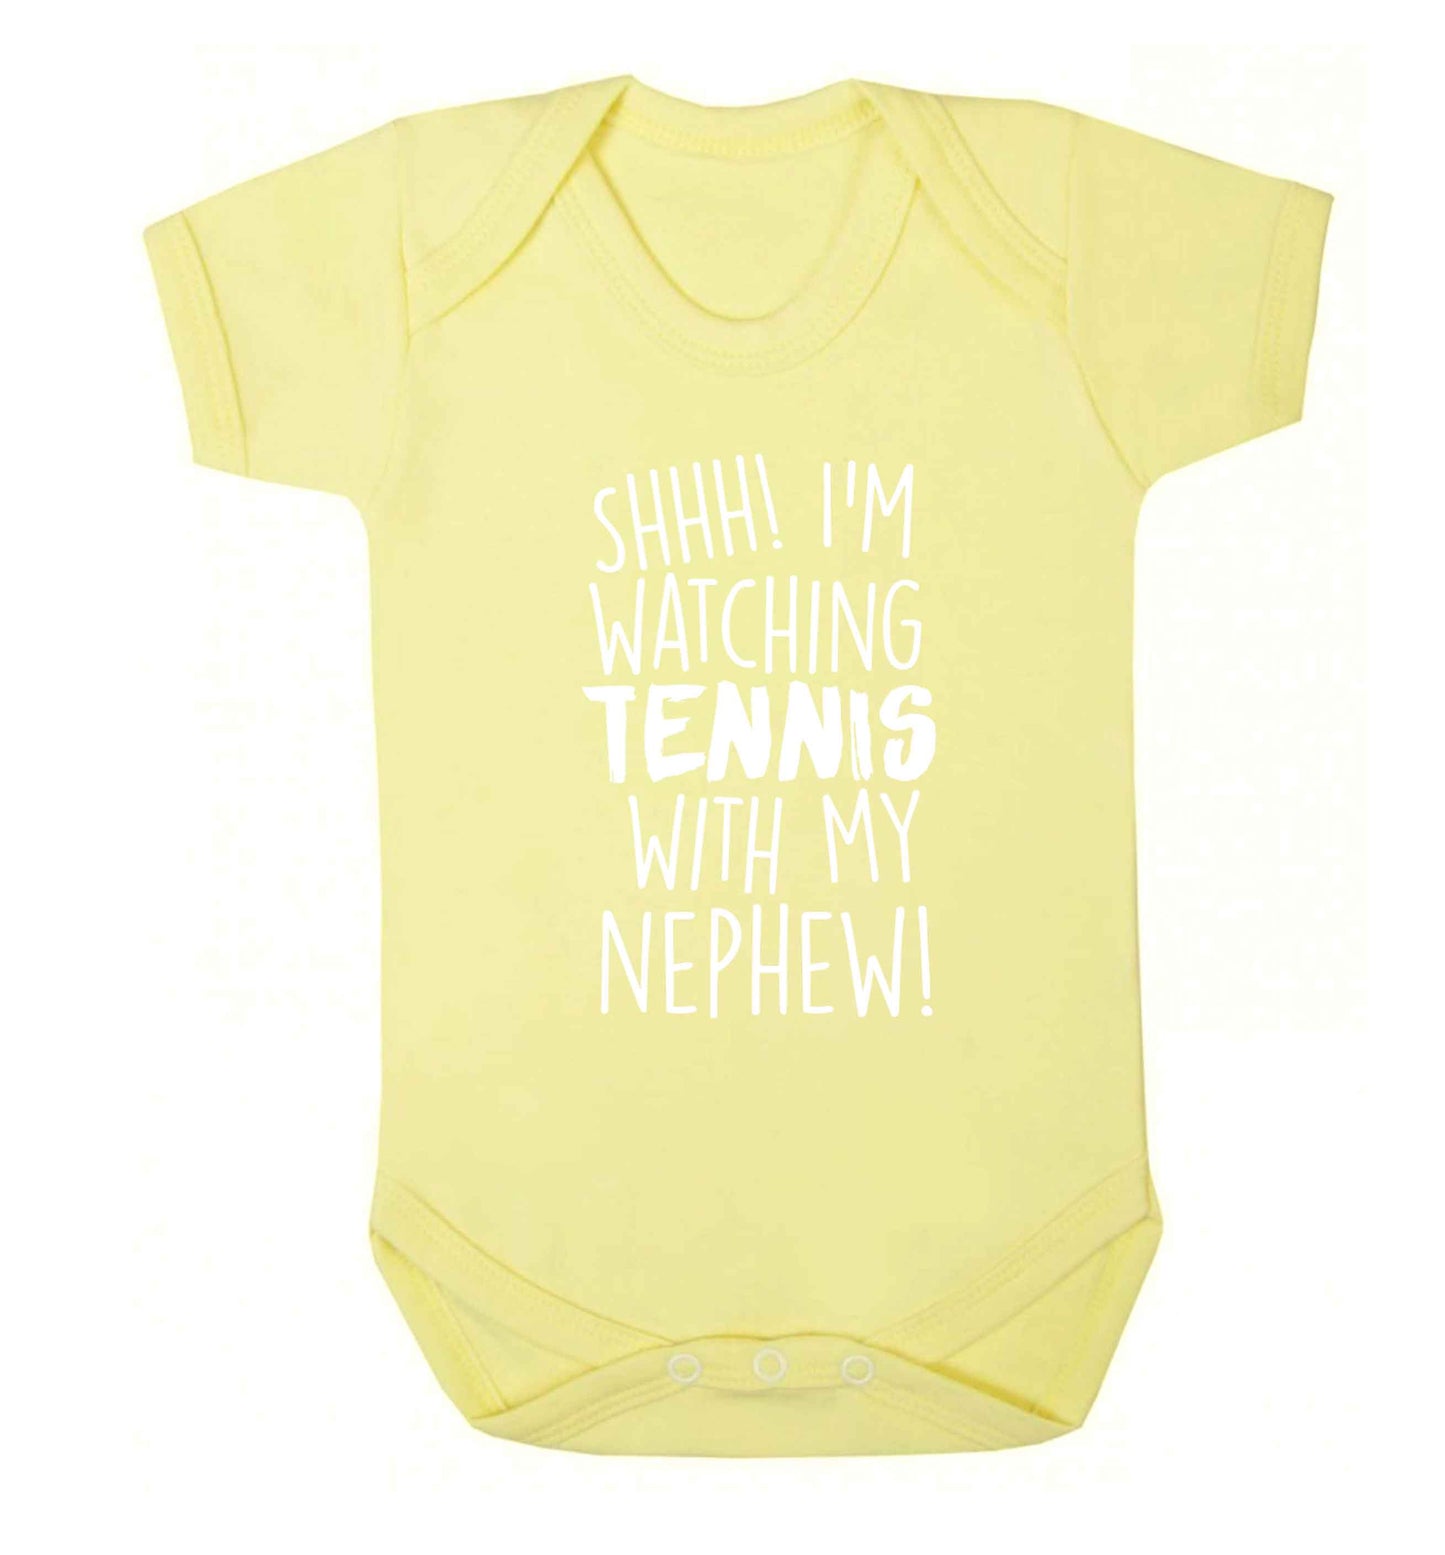 Shh! I'm watching tennis with my nephew! Baby Vest pale yellow 18-24 months